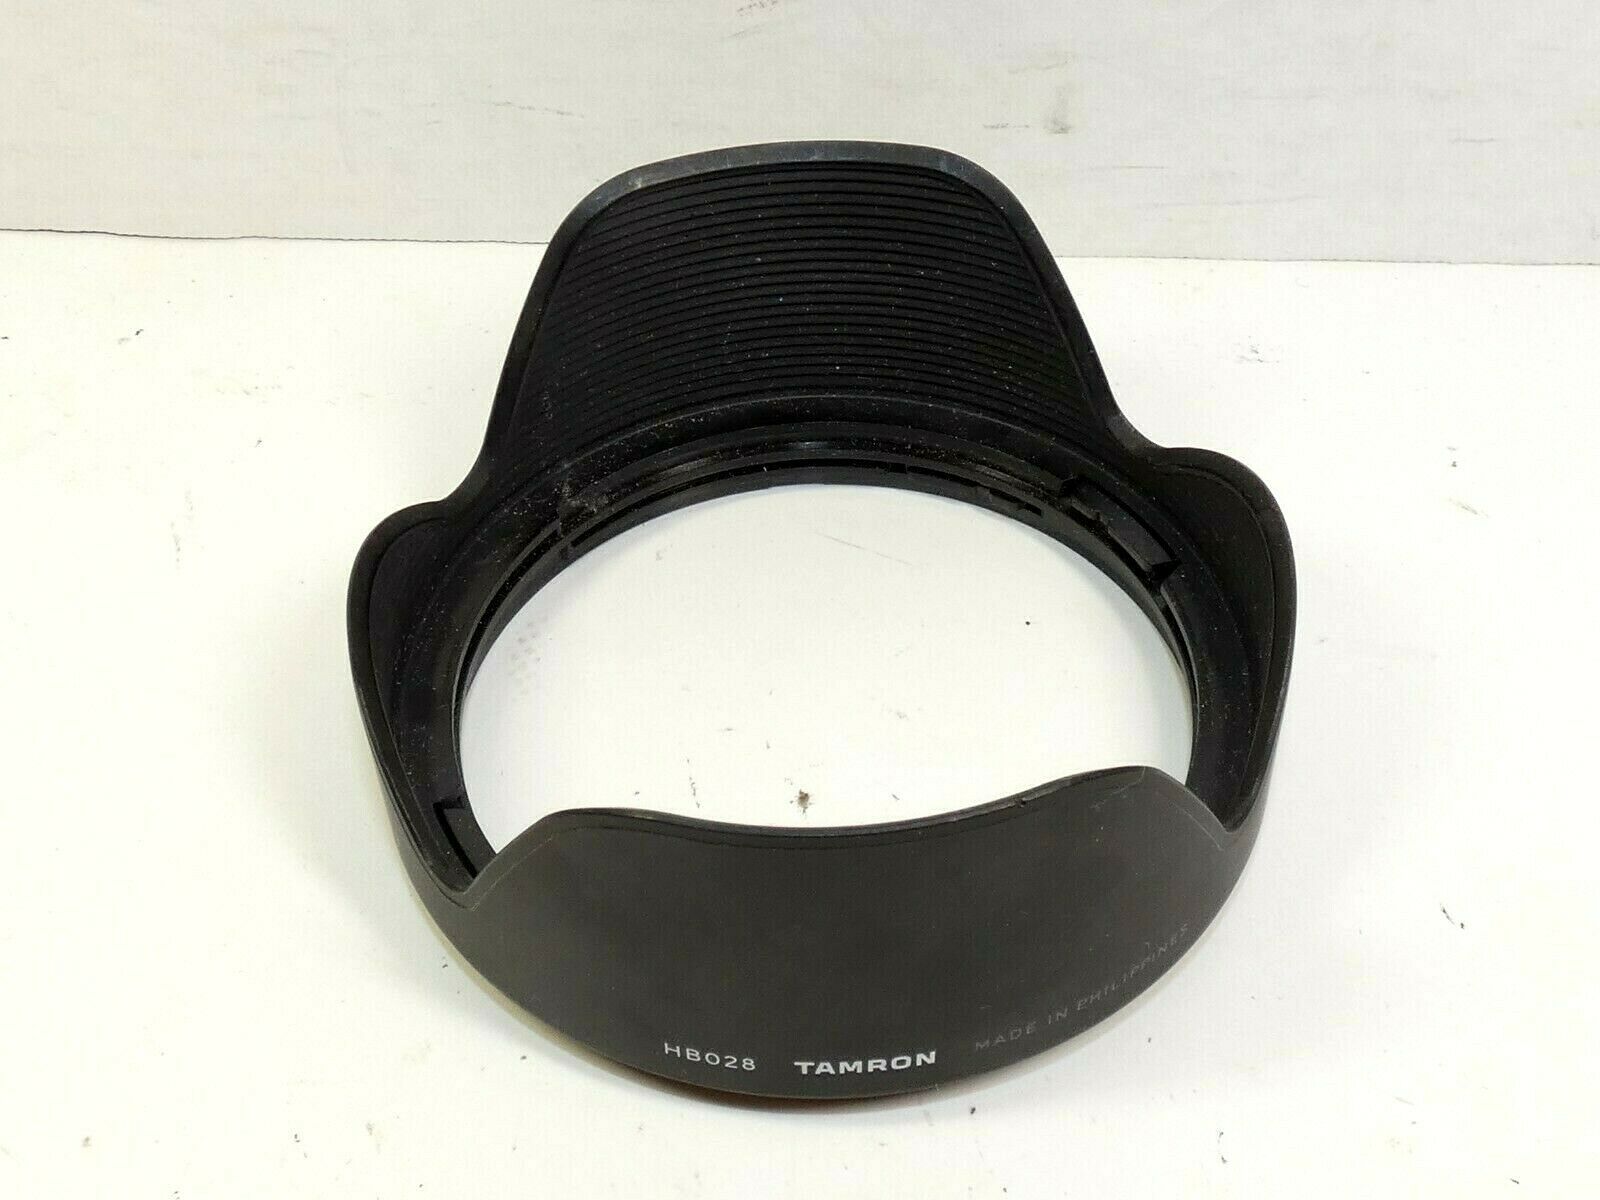 Tamron Hb028 Lens Hood Shade Pre-owned